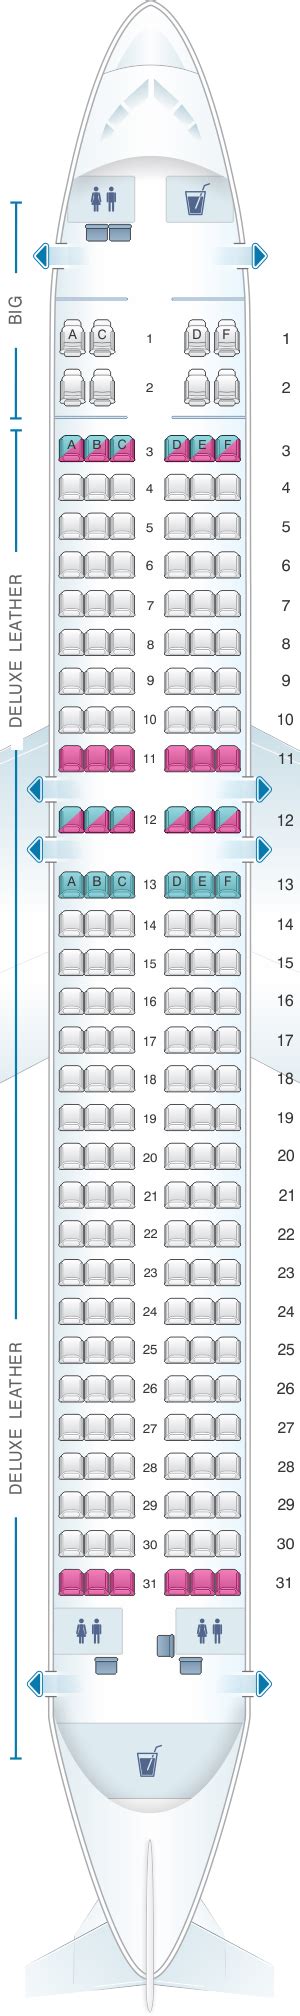 Spirit Airlines Seating Chart A320 Awesome Home